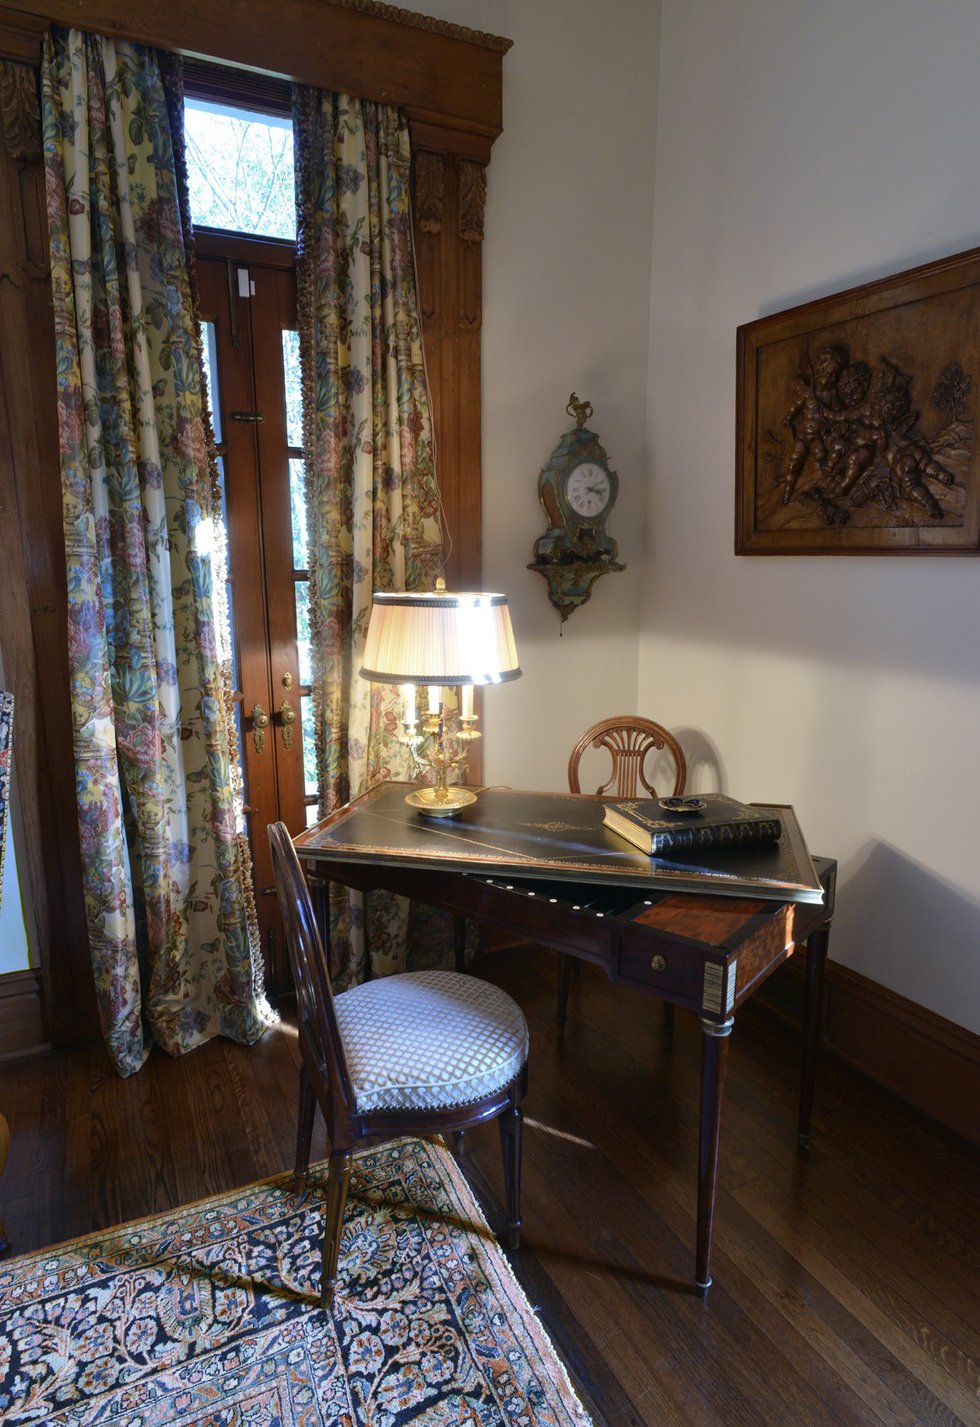  An antique French tric-trac table, created for a game similar to backgammon, is the focal point of this corner of the living room.